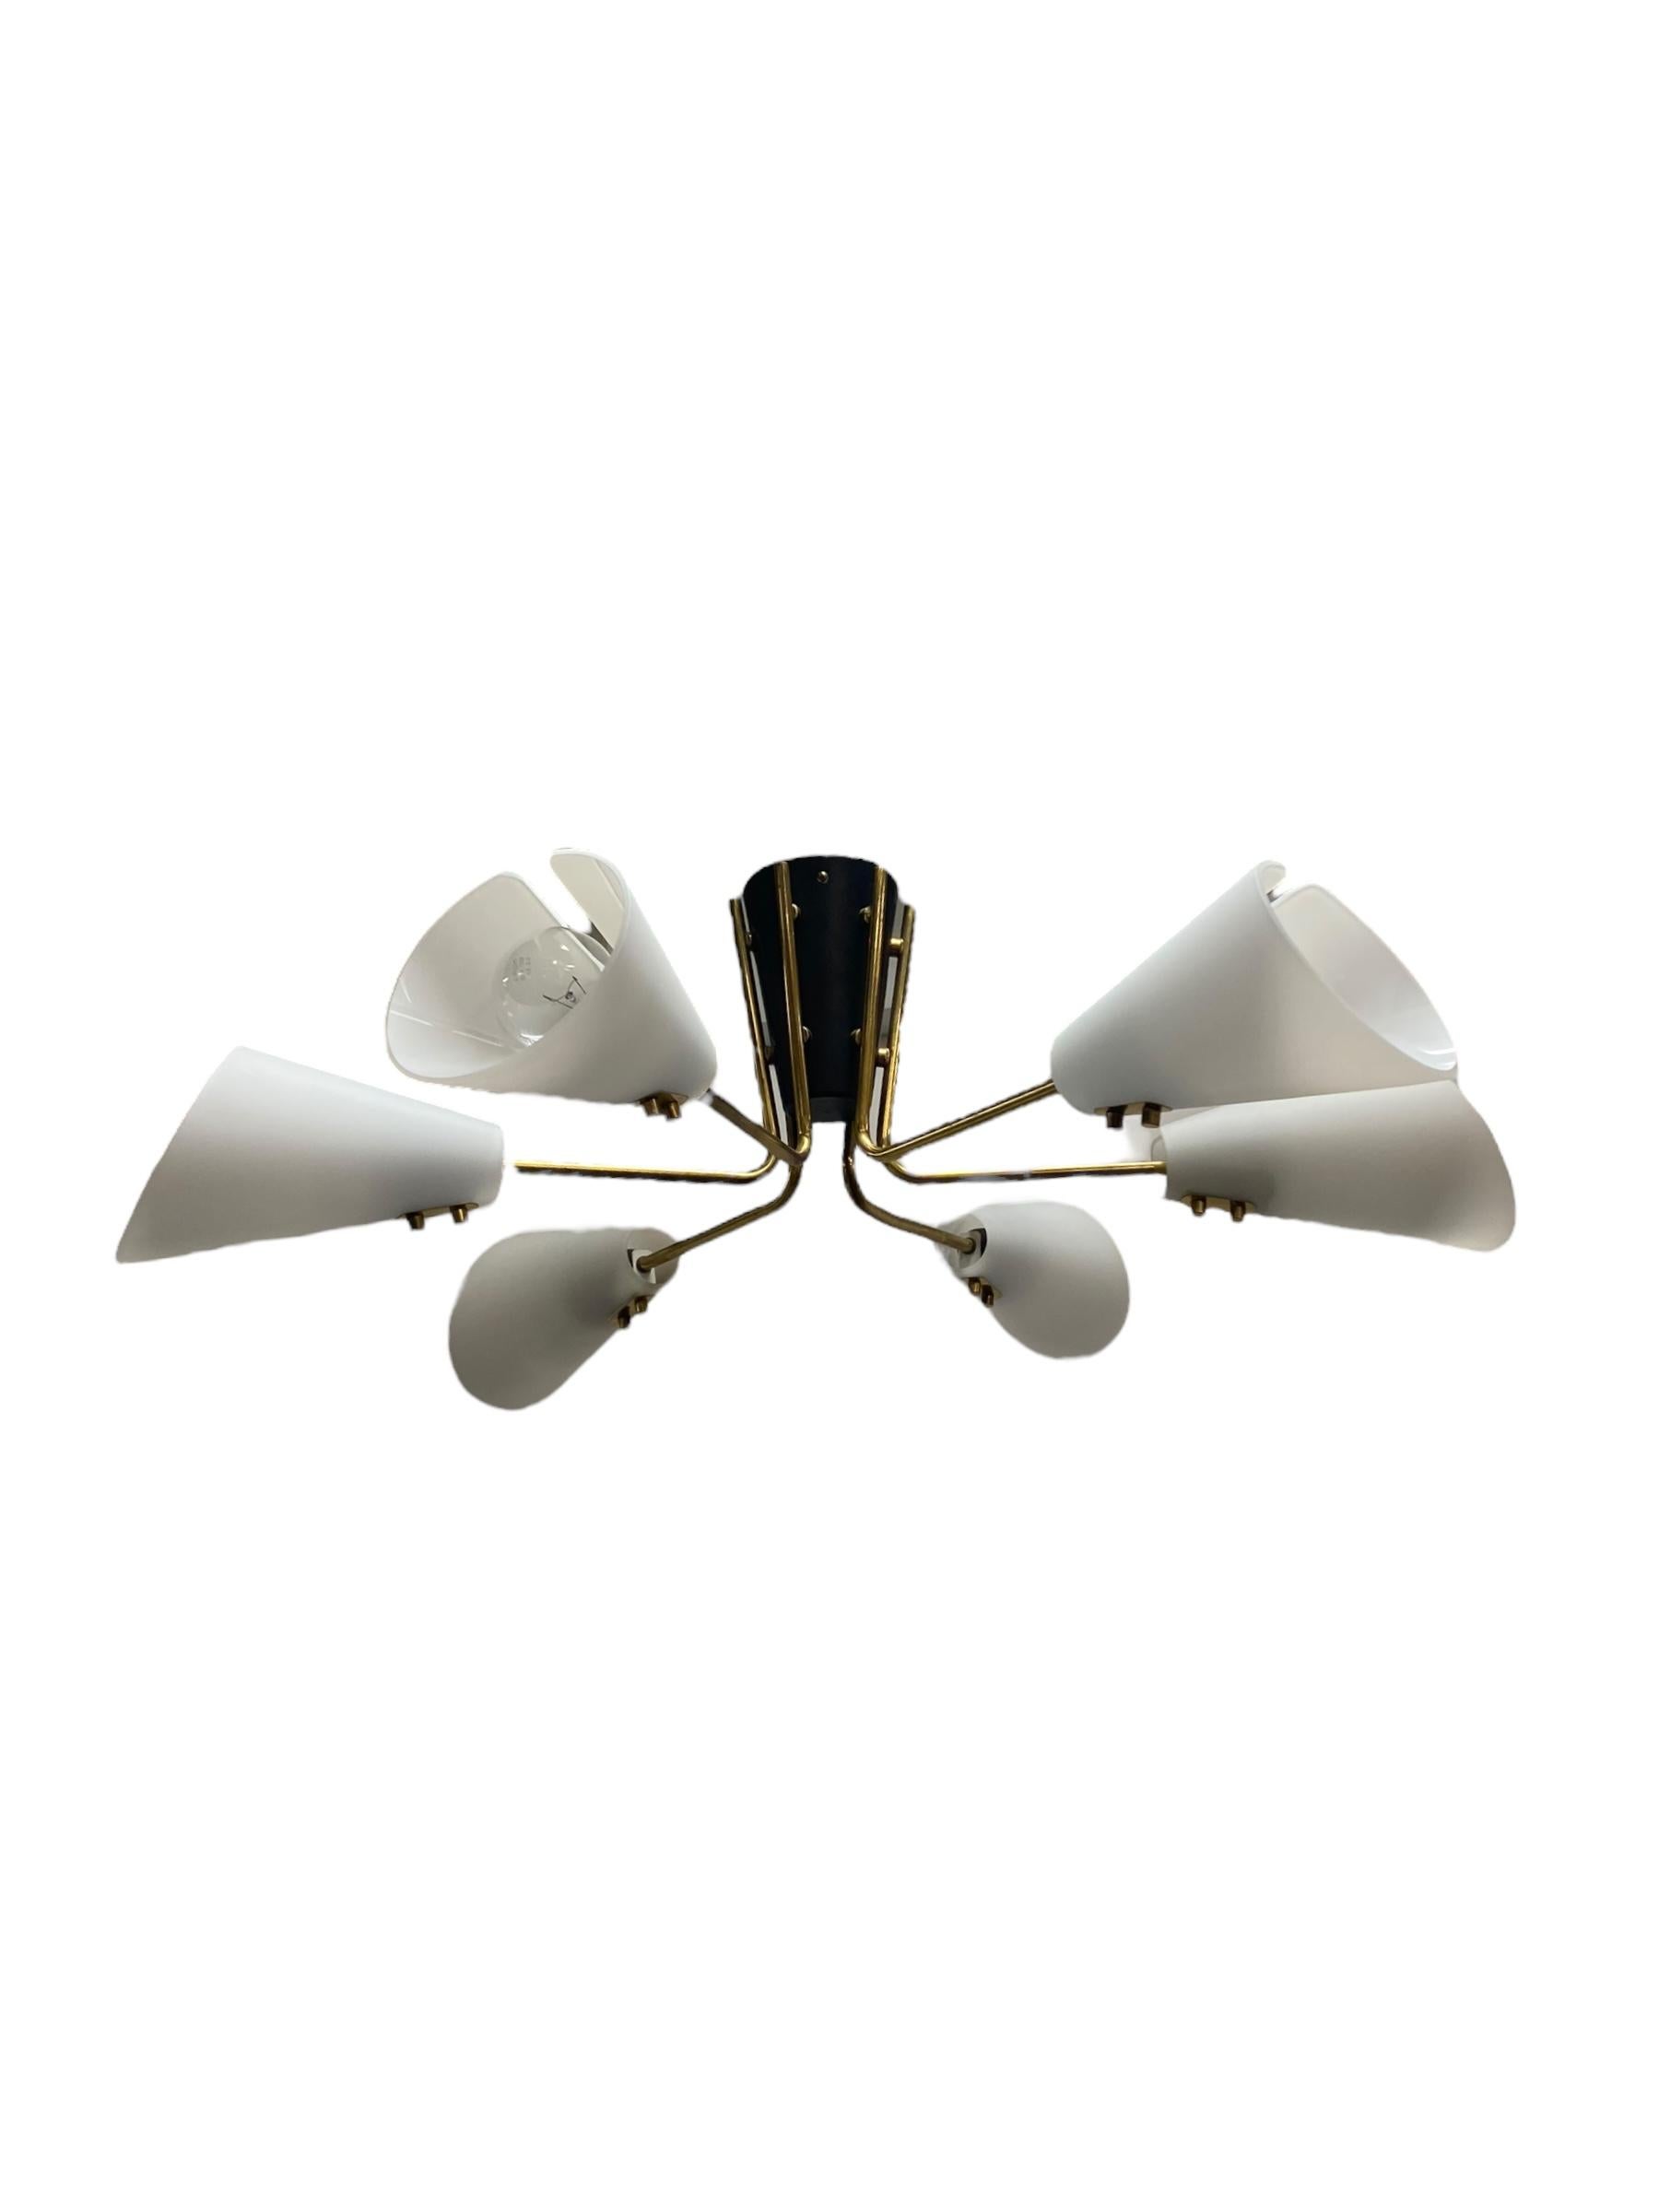 A brilliant lamp by Itsu from the 1950s. This type lamp suits well in any design interior. The black and white combo with the golden brass stems is simple, elegant, minimalistic and functional. A superior vintage look that suits perfectly in this